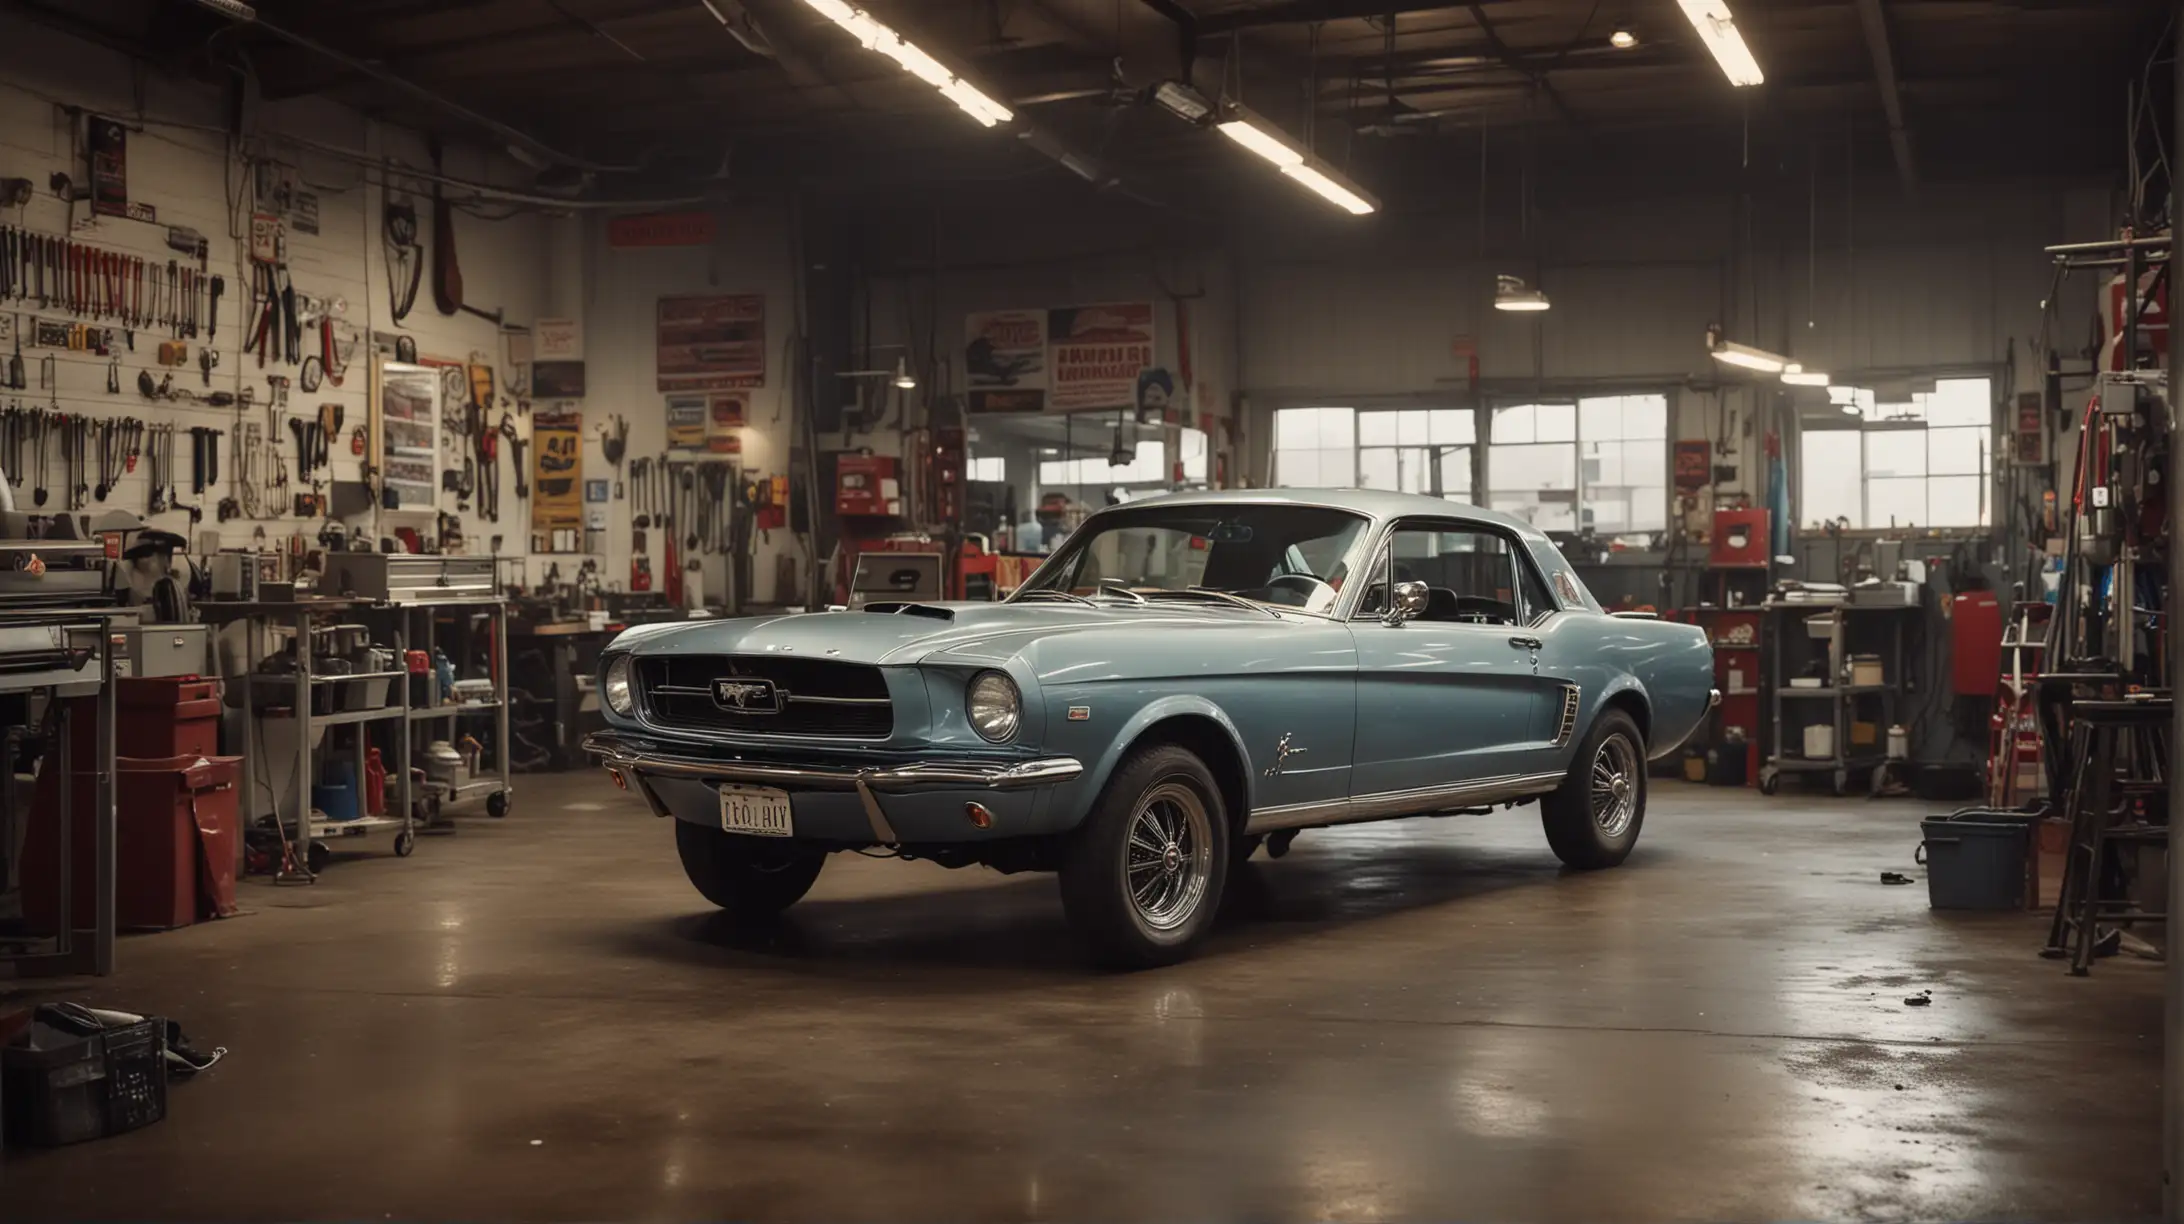 An image of the interior of a car repair shop with a chrome theme. A vintage mustang car is in the mid-ground. Cinematic lighting, photographic quality.